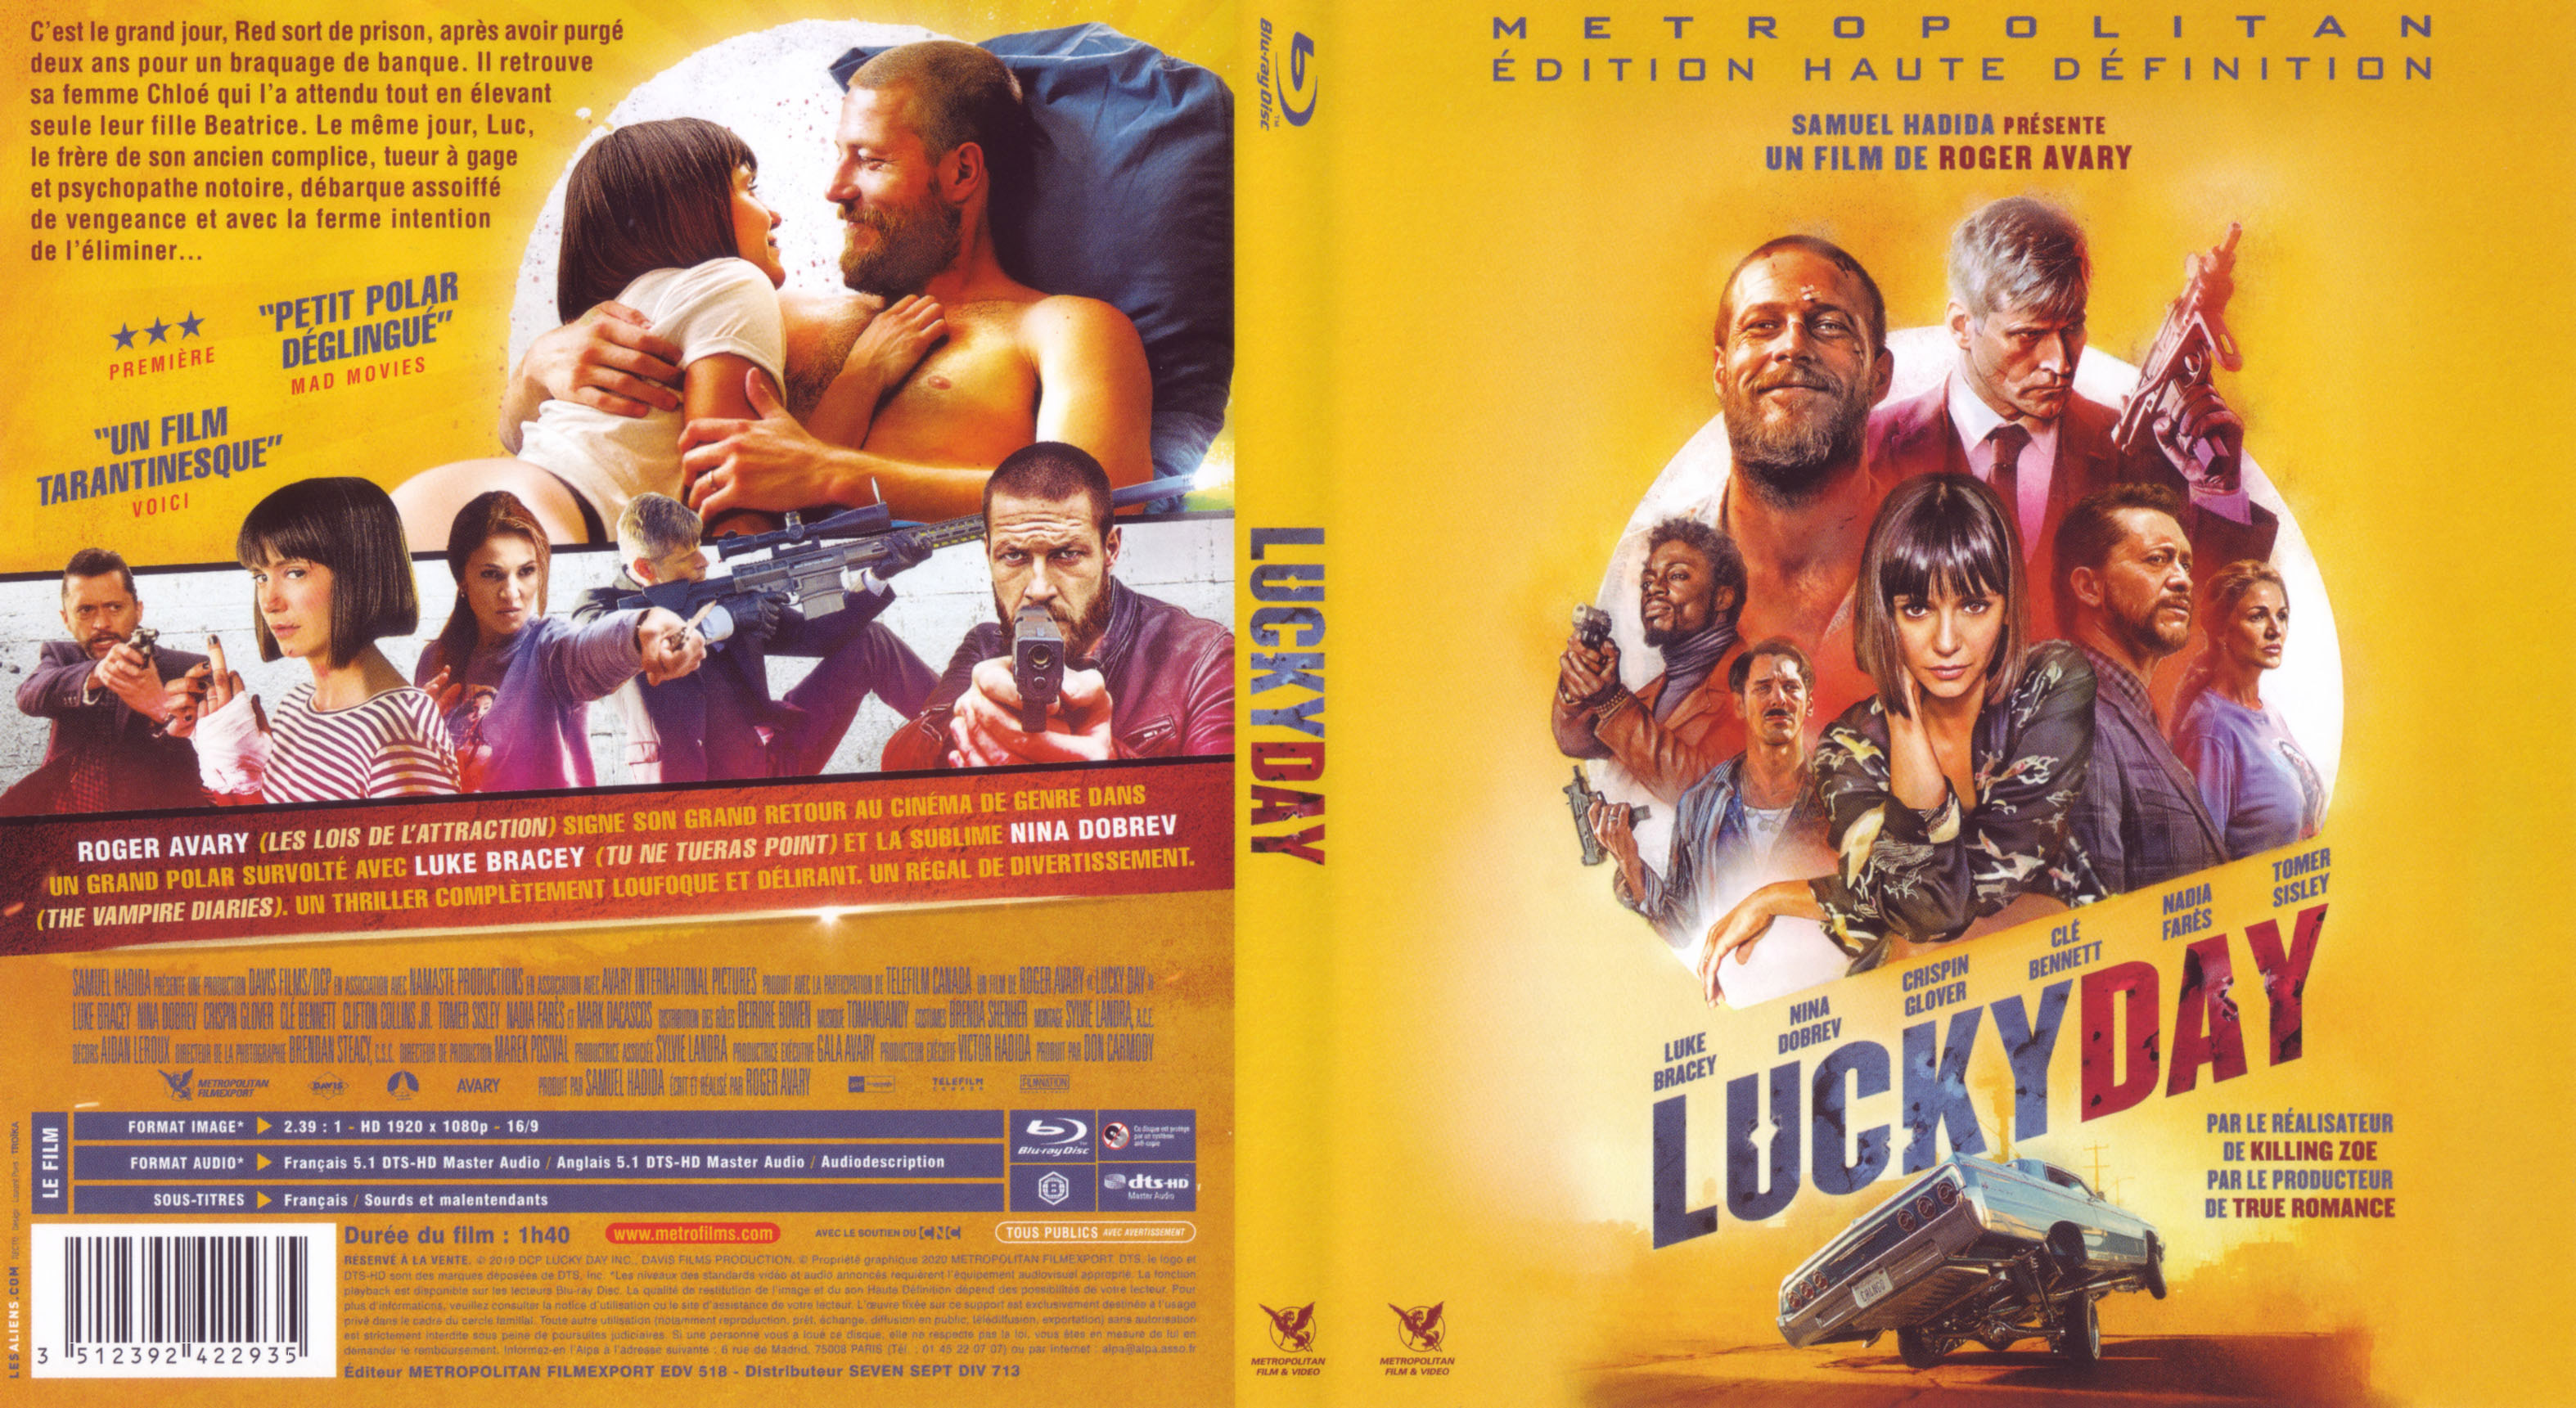 Jaquette DVD Lucky day (BLU-RAY)